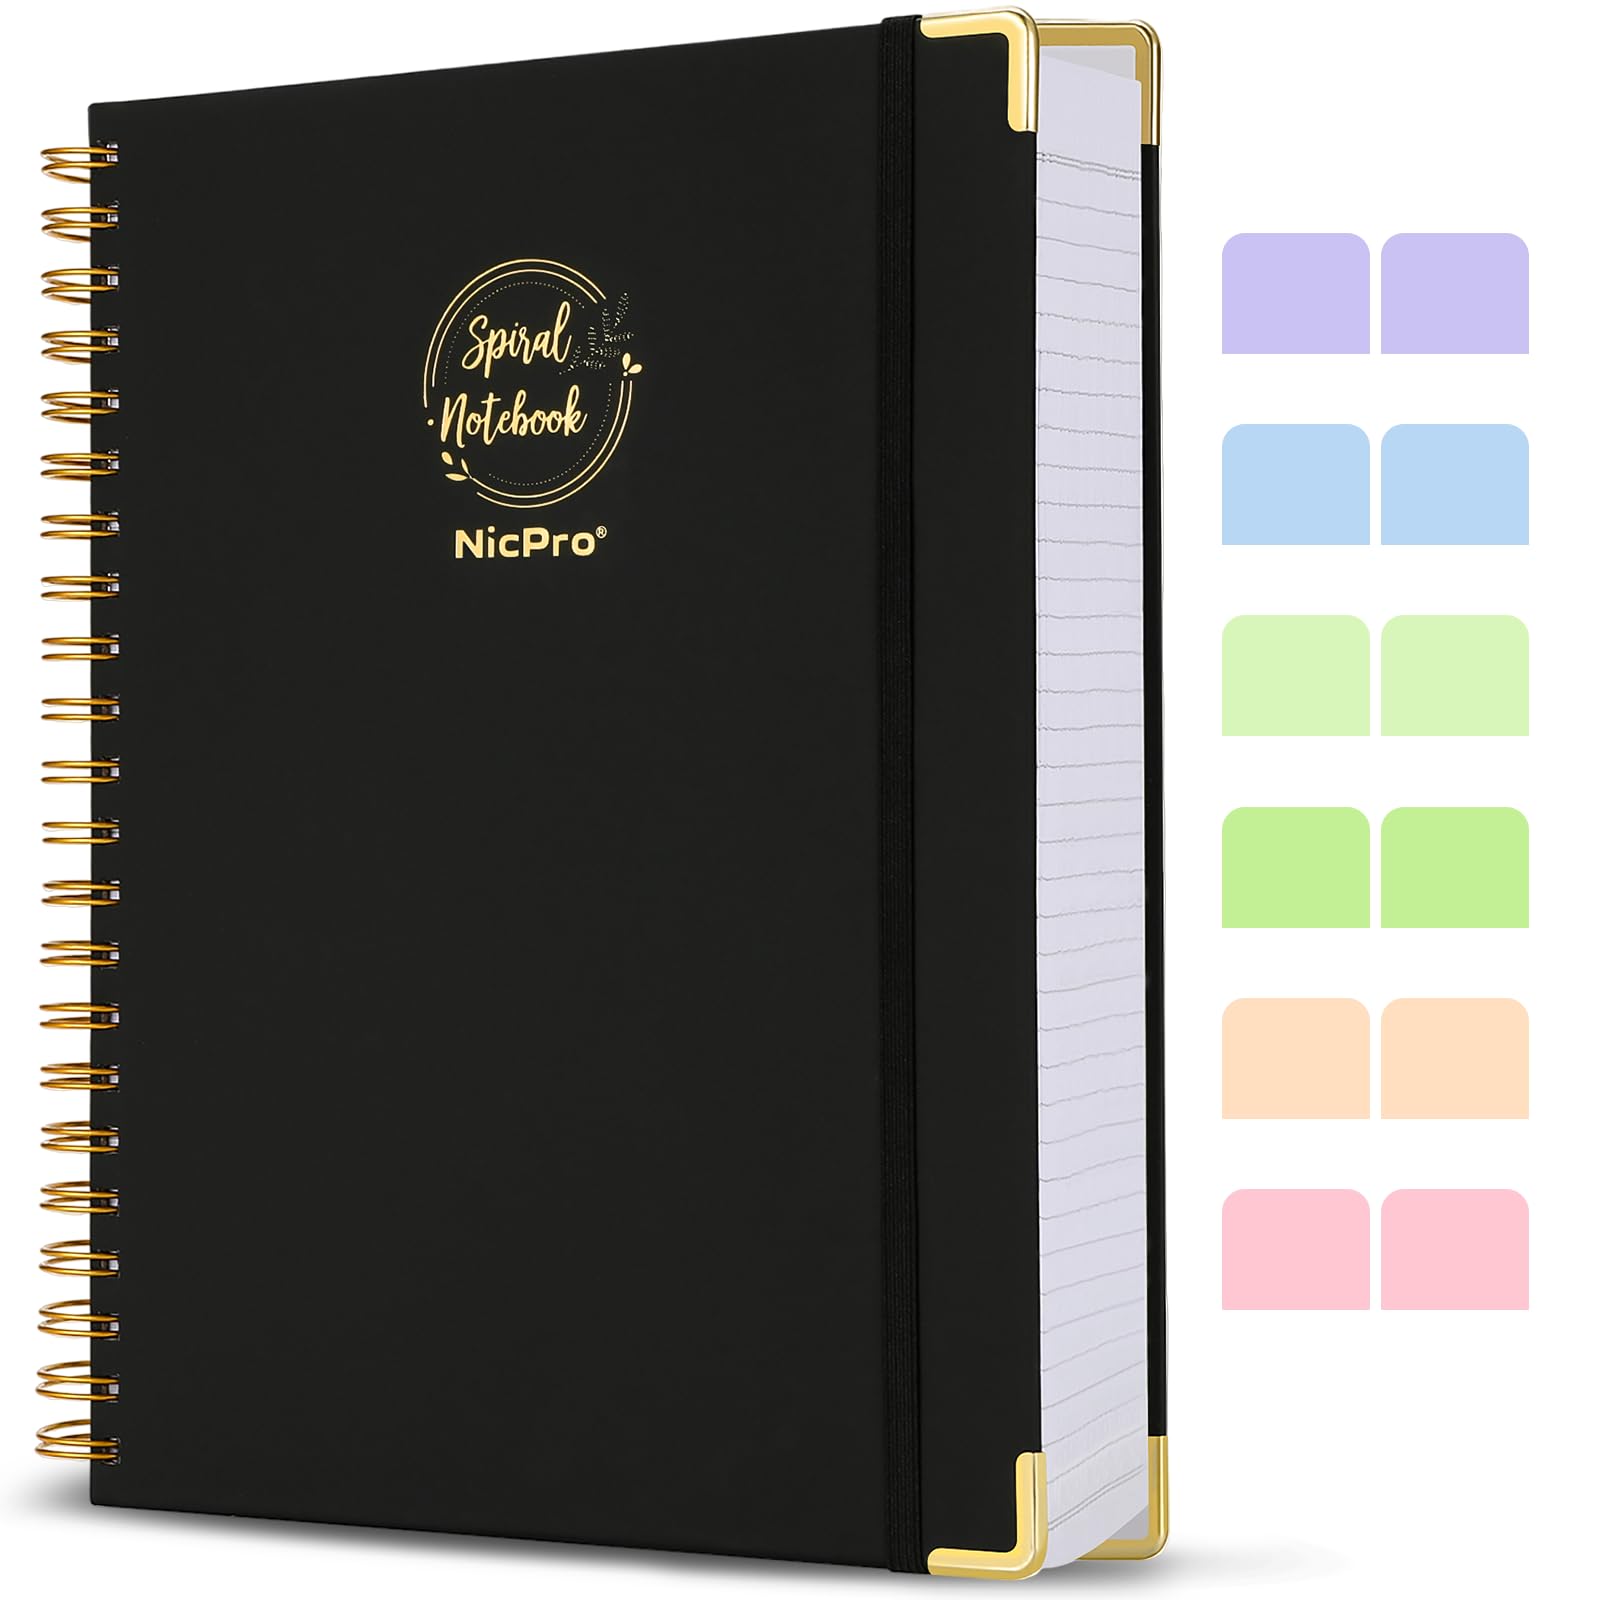 Nicpro Spiral Notebook 300 Page,8.5"x 11", Black Leather Hardcover Note Book Journal A4 Book College Ruled with 60pcs Index Tabs for Work School Notes, Journals Writing,100gsm Thick Paper